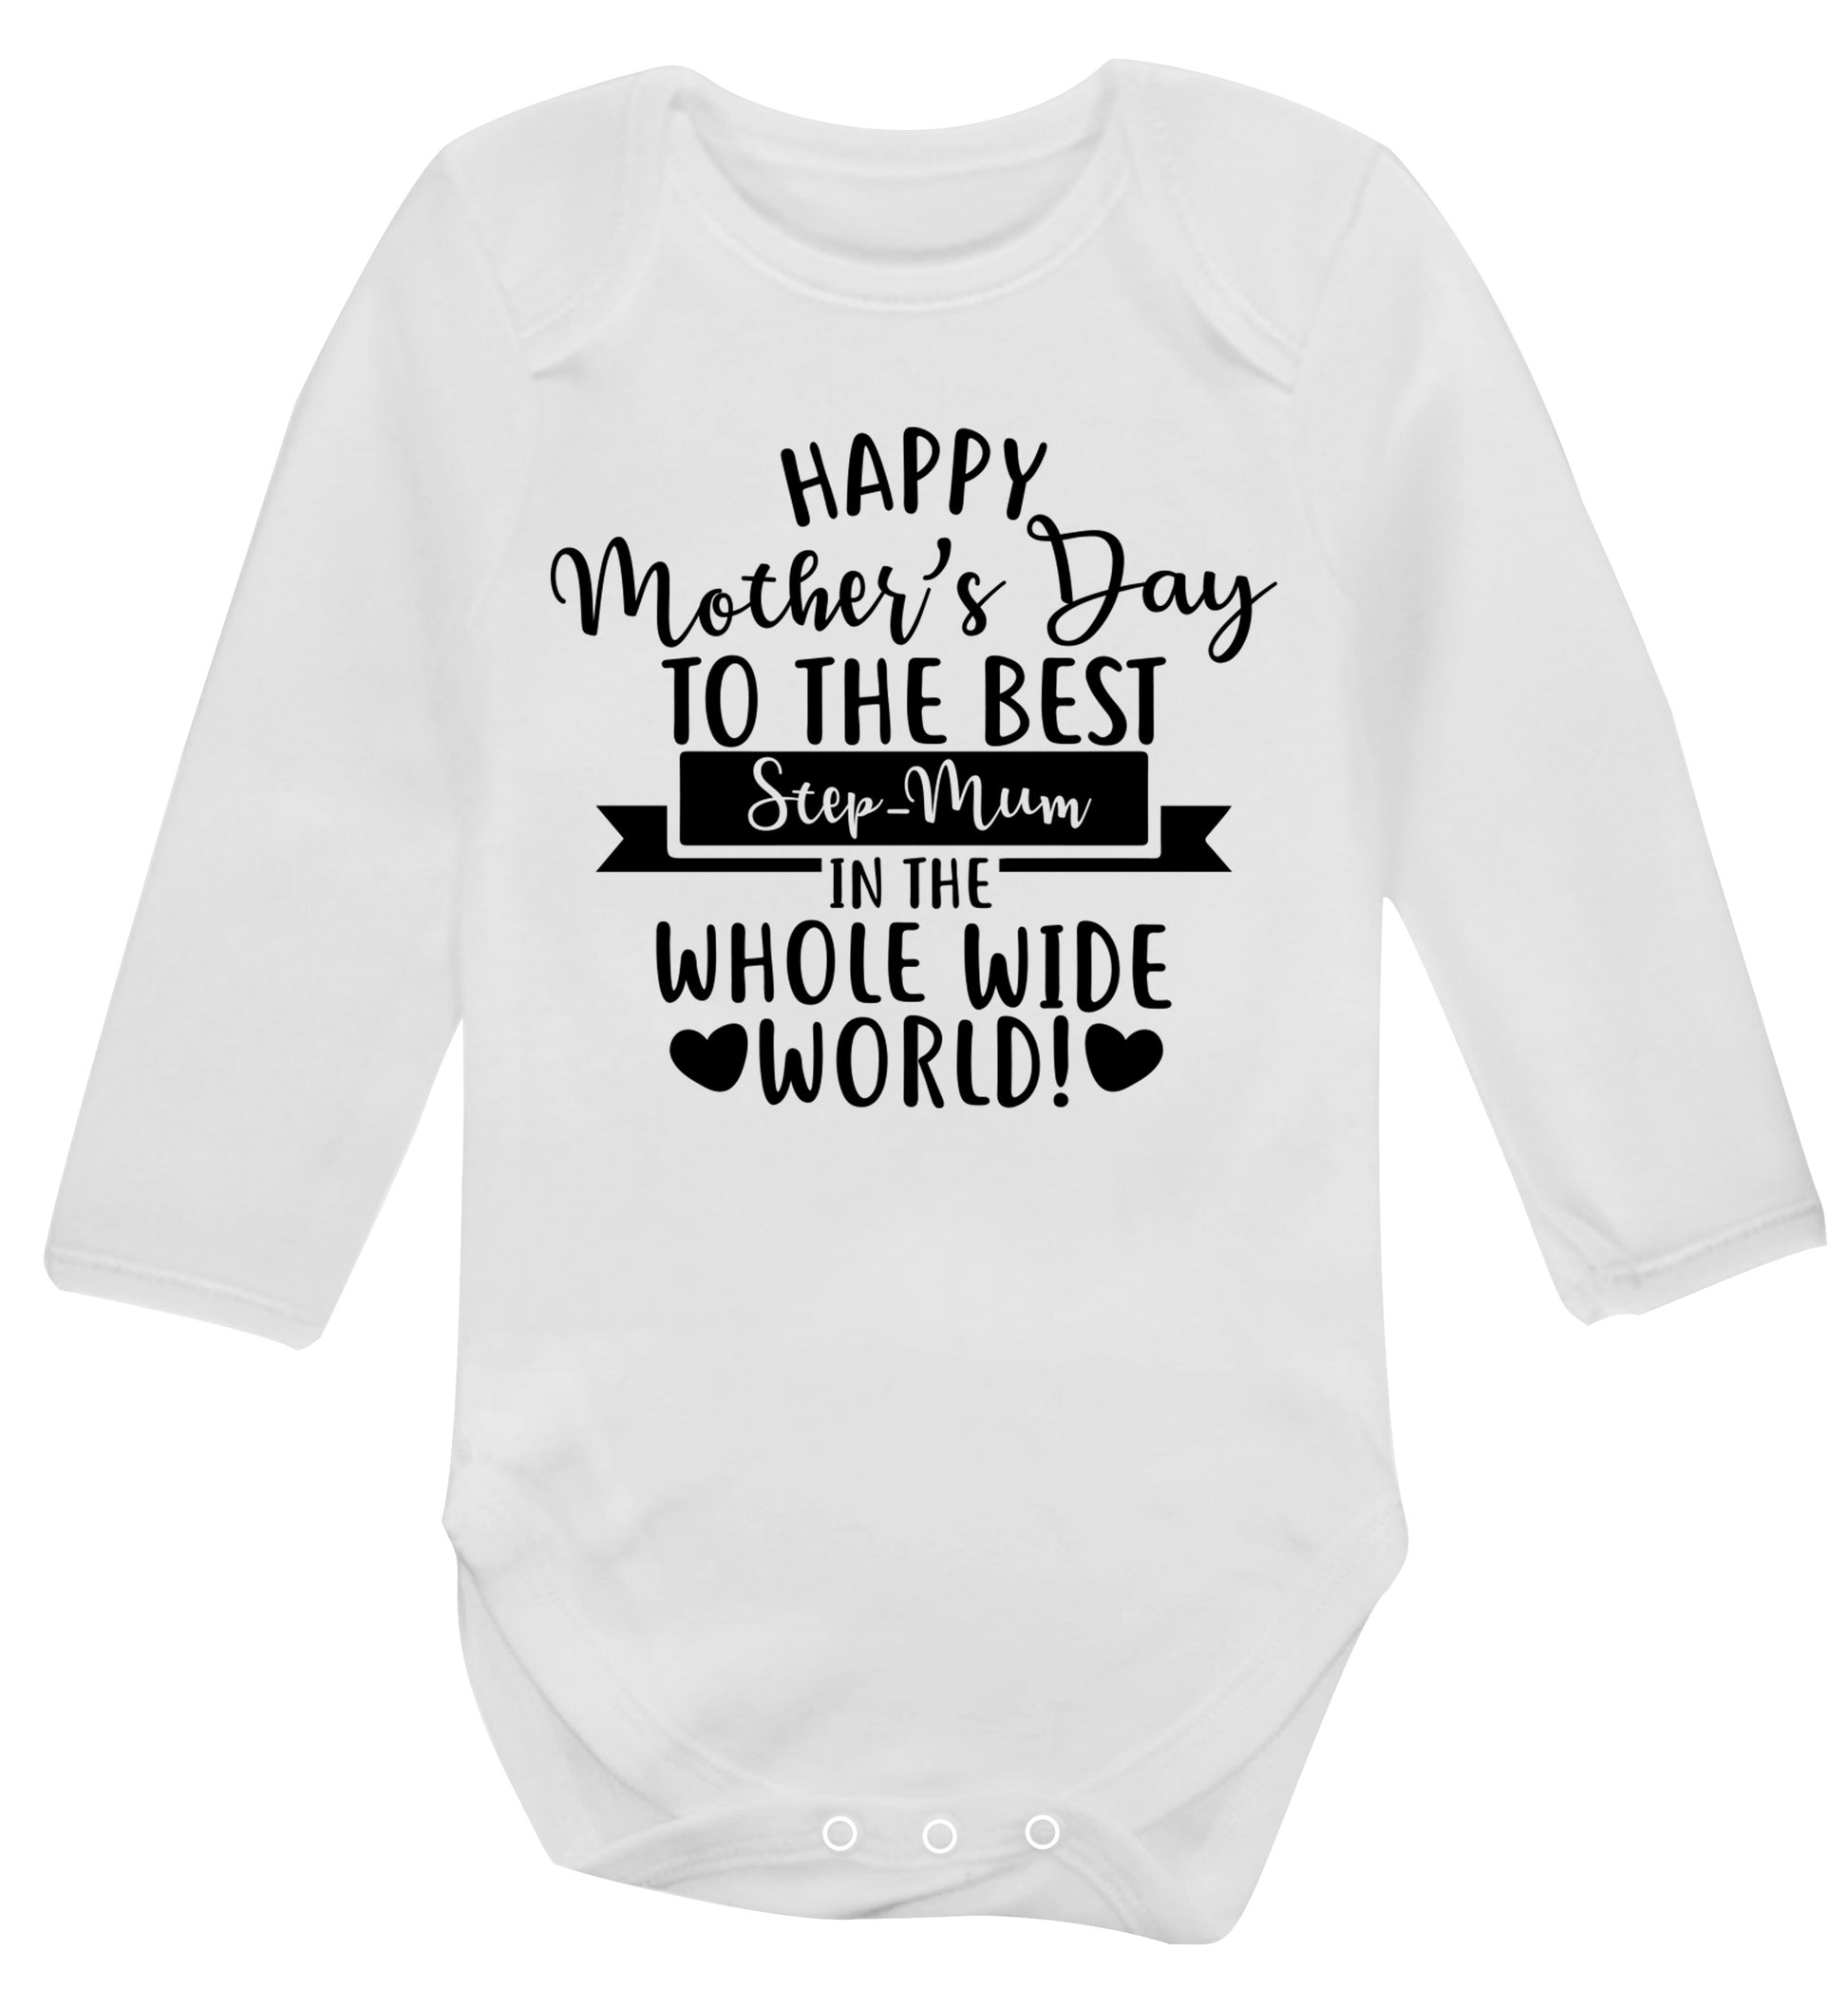 Happy mother's day to the best step-mum in the world Baby Vest long sleeved white 6-12 months